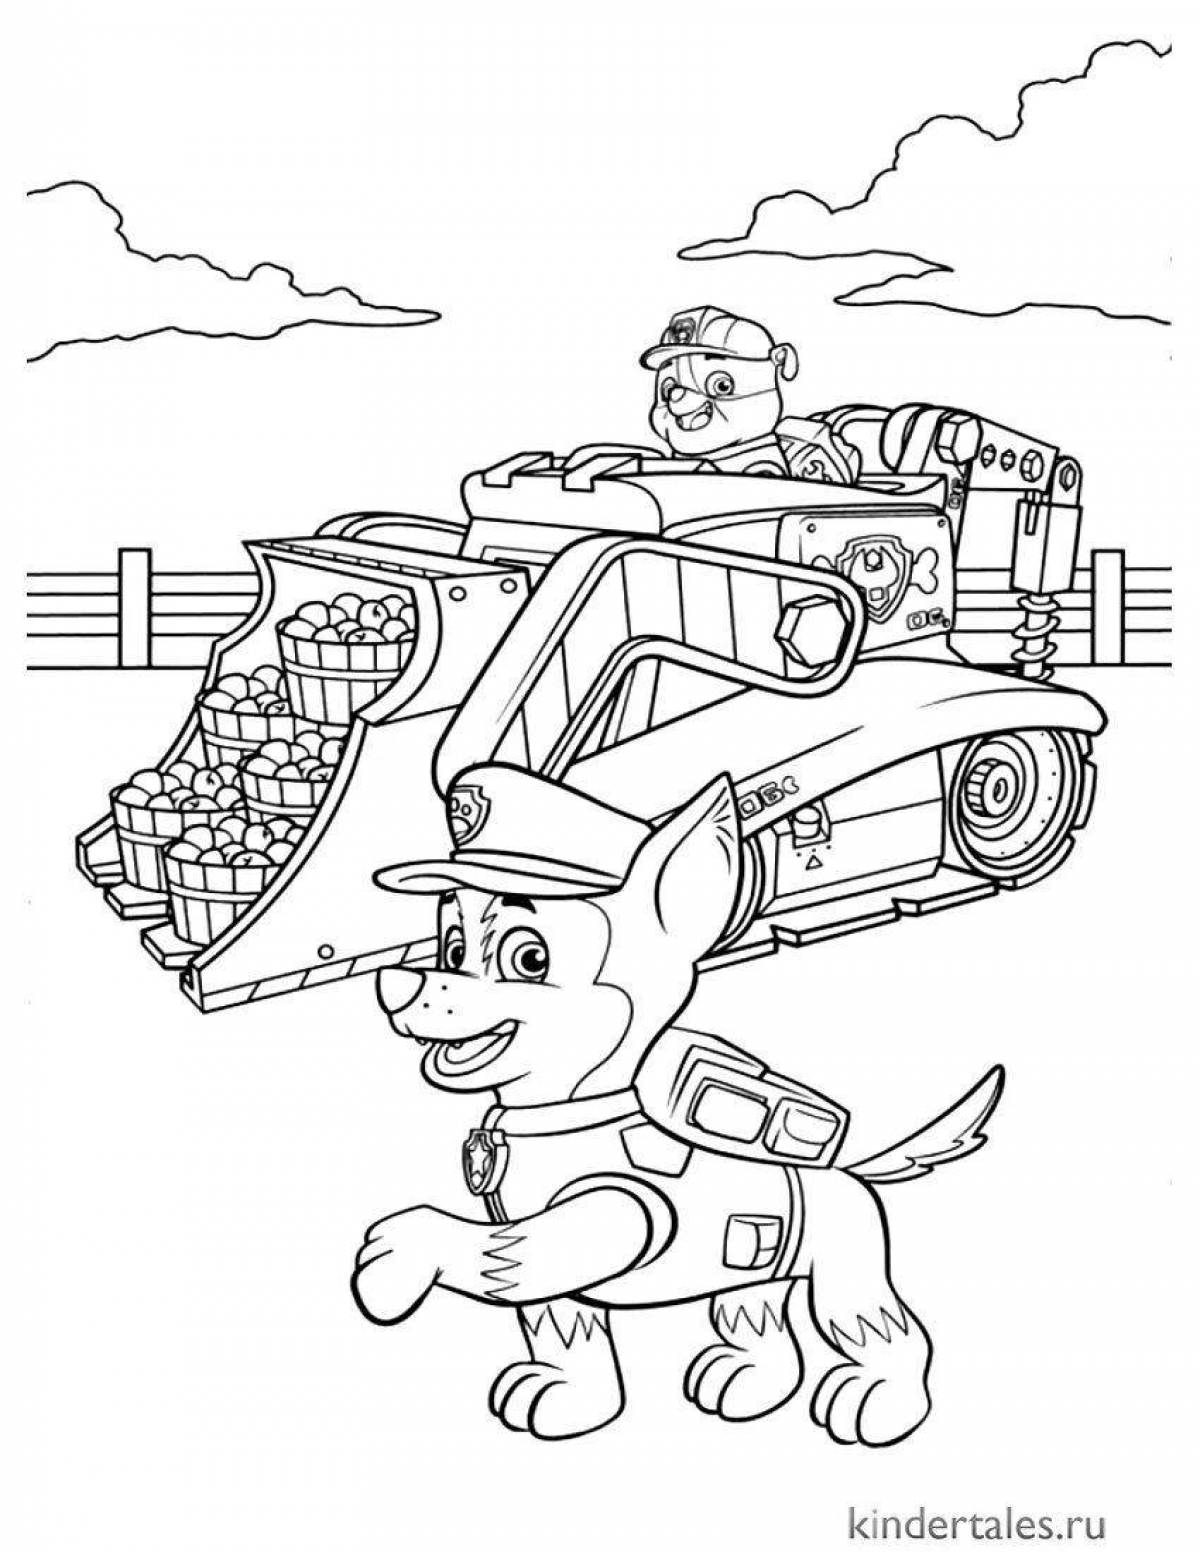 Amazing racer coloring pages for kids